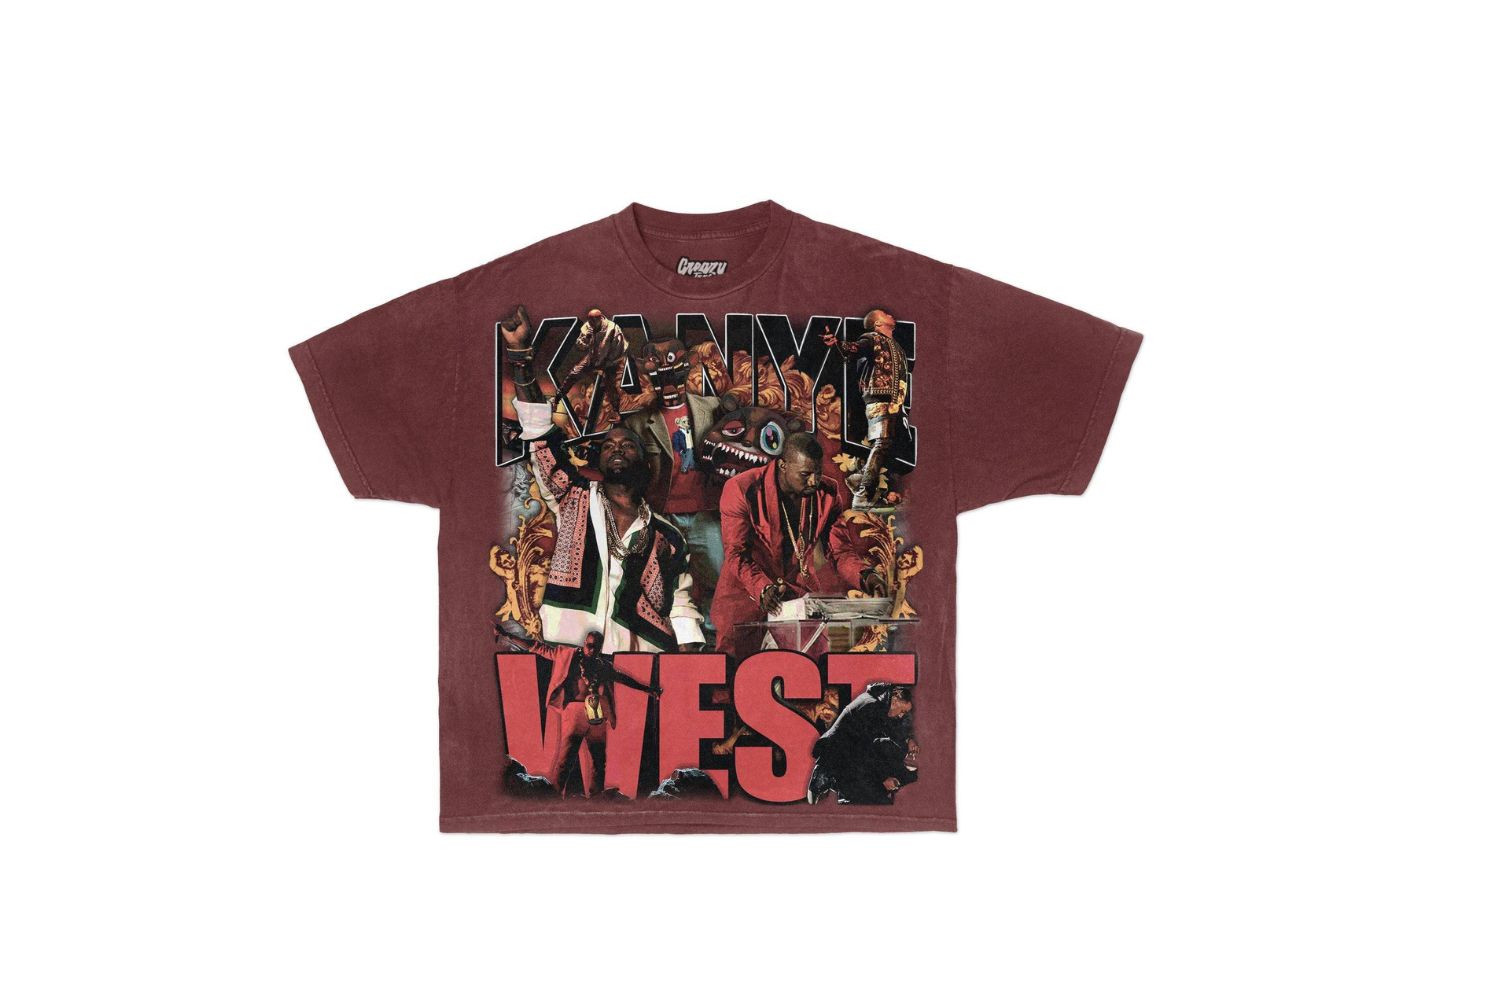 9-intriguing-facts-about-kanye-west-shirt